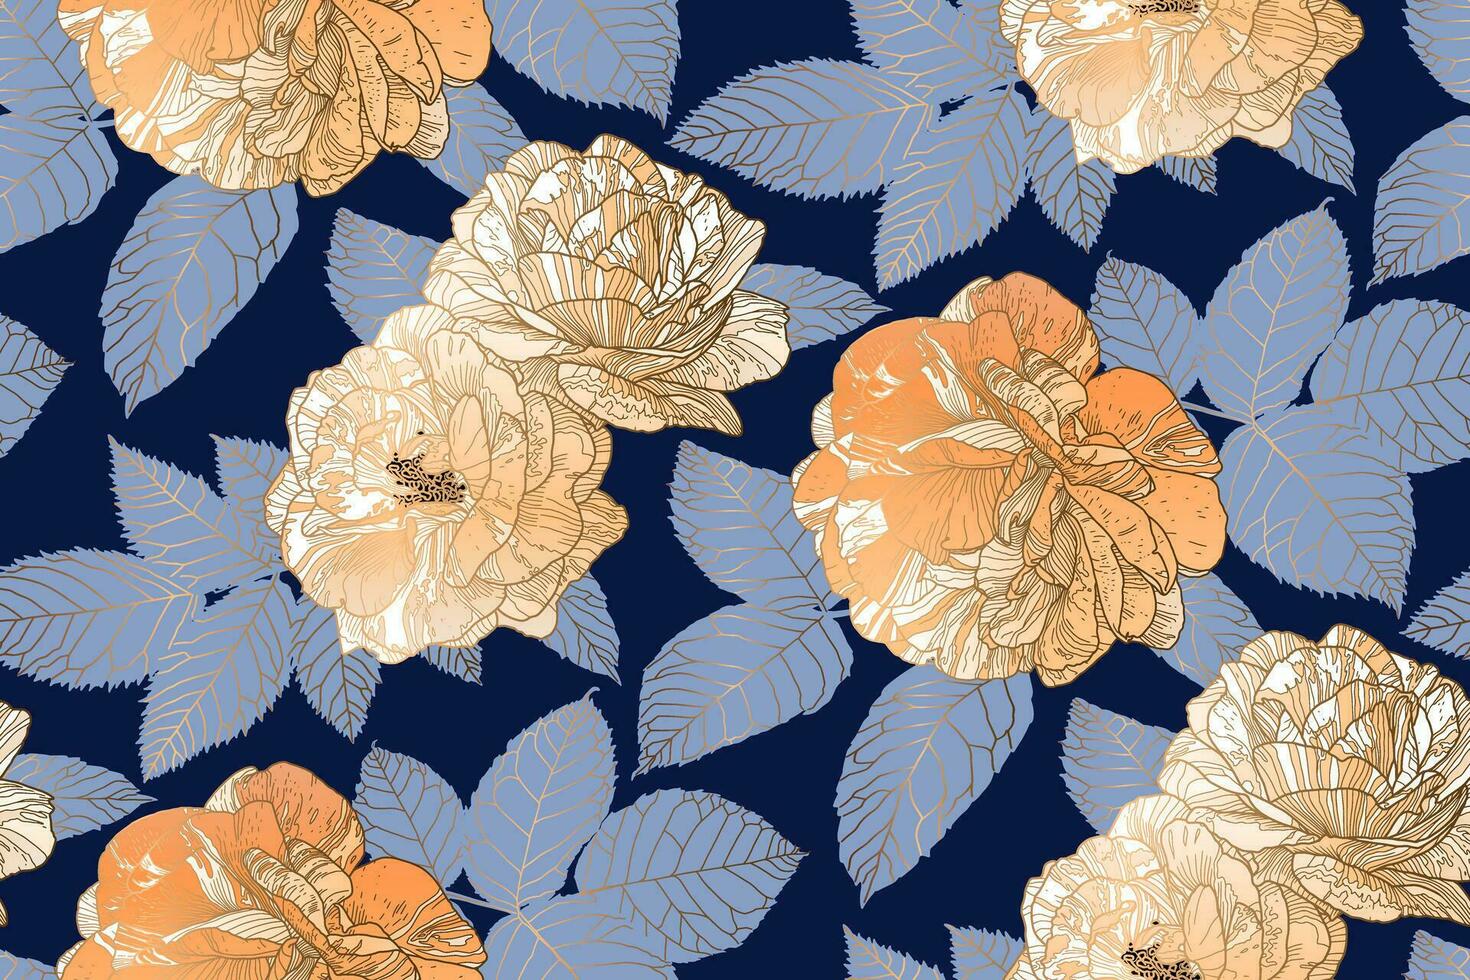 Floral repeating pattern of roses in sandy brown color and light blue leaves on dark blue backdrop. Wallpaper design for textiles, papers, prints, fashion, card background, beauty products. vector